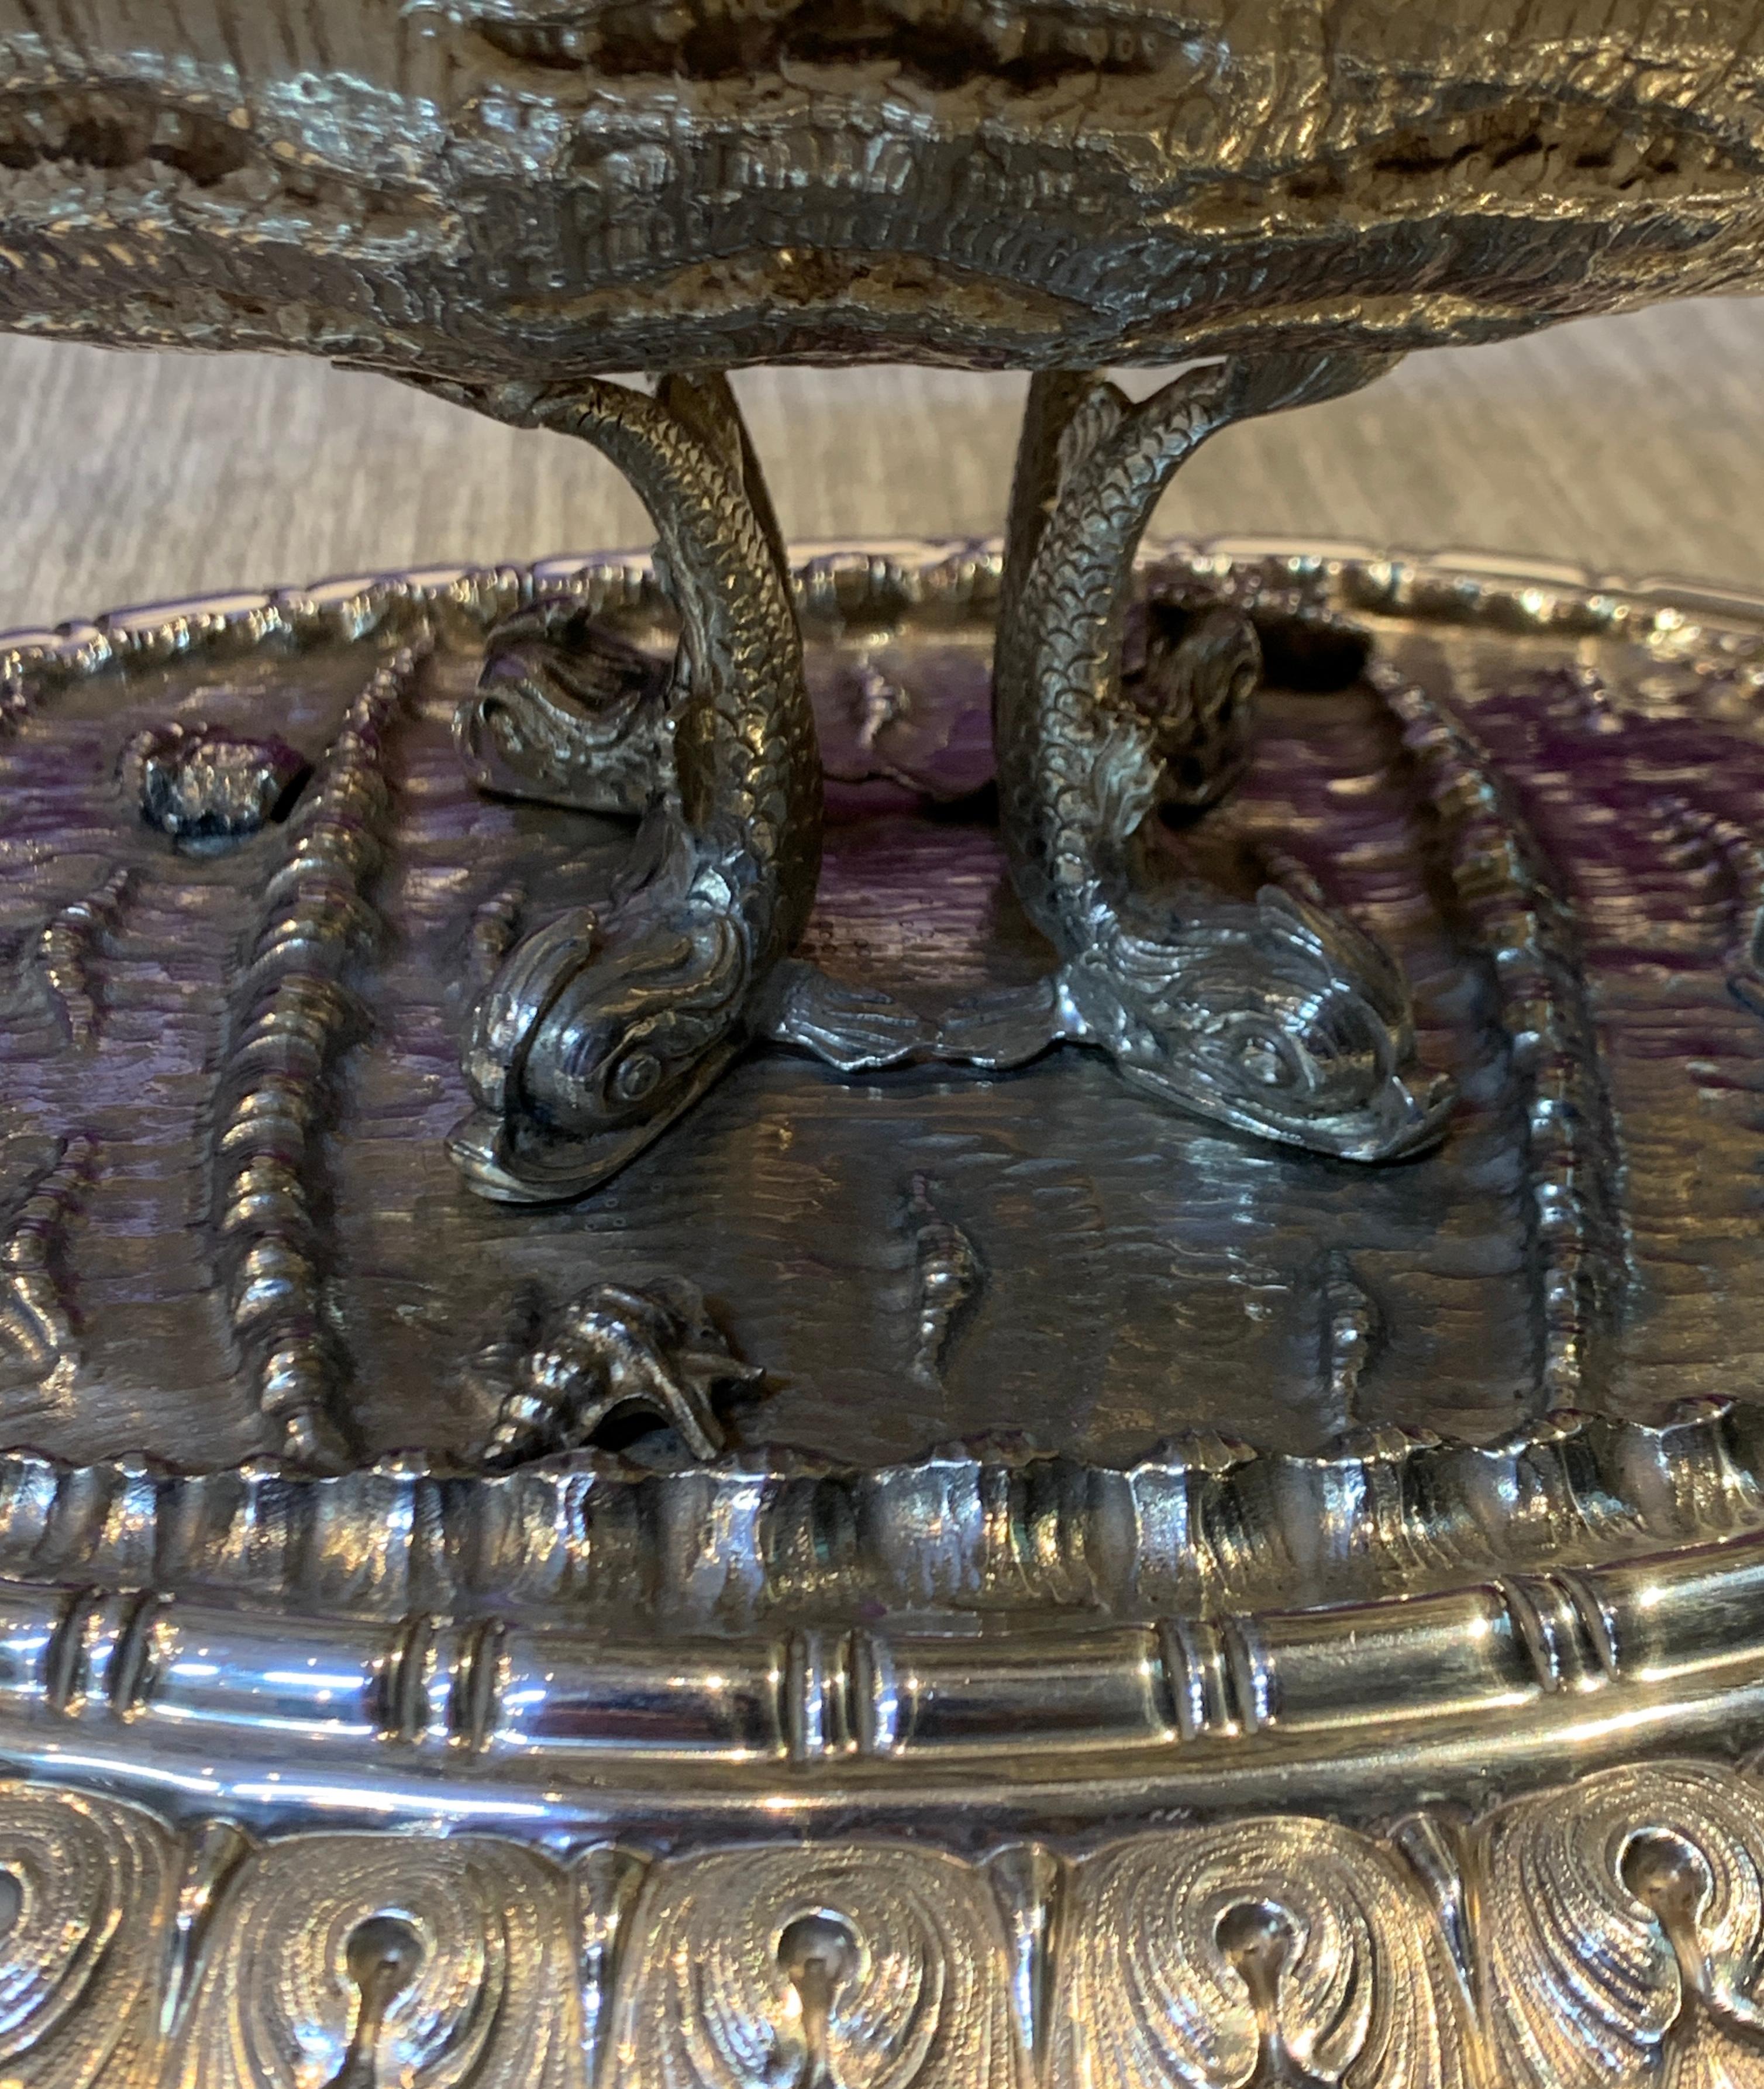 Exceptional Nautical Themed Silver Centerpiece by Buccellati

A silver masterpiece depicting: putto, leaves, Neptune holding a trident, shell, and dolphins by master silversmiths Buccellati

The perfect centerpiece for a dinner table.

Made Circa